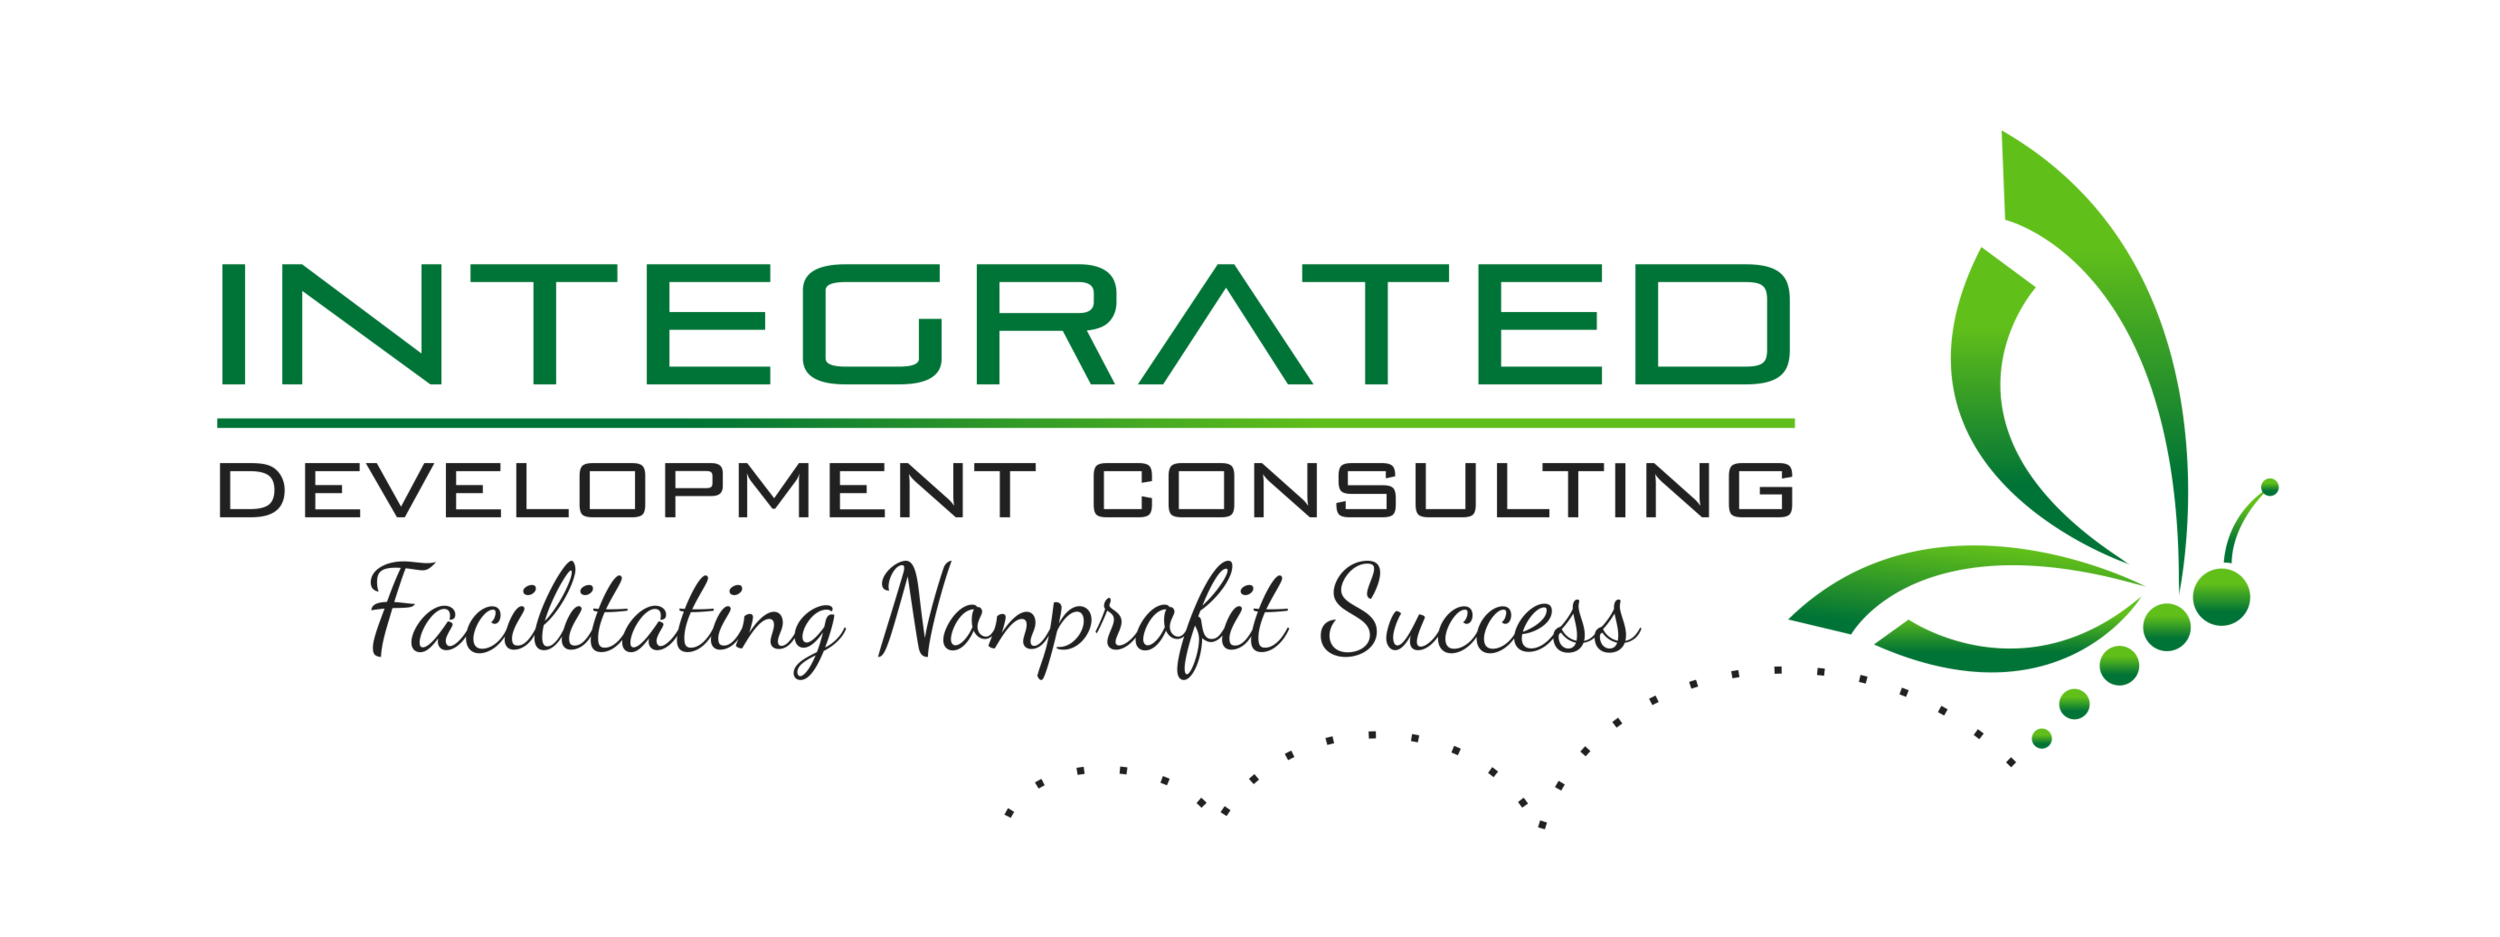 Integrated Development Consulting